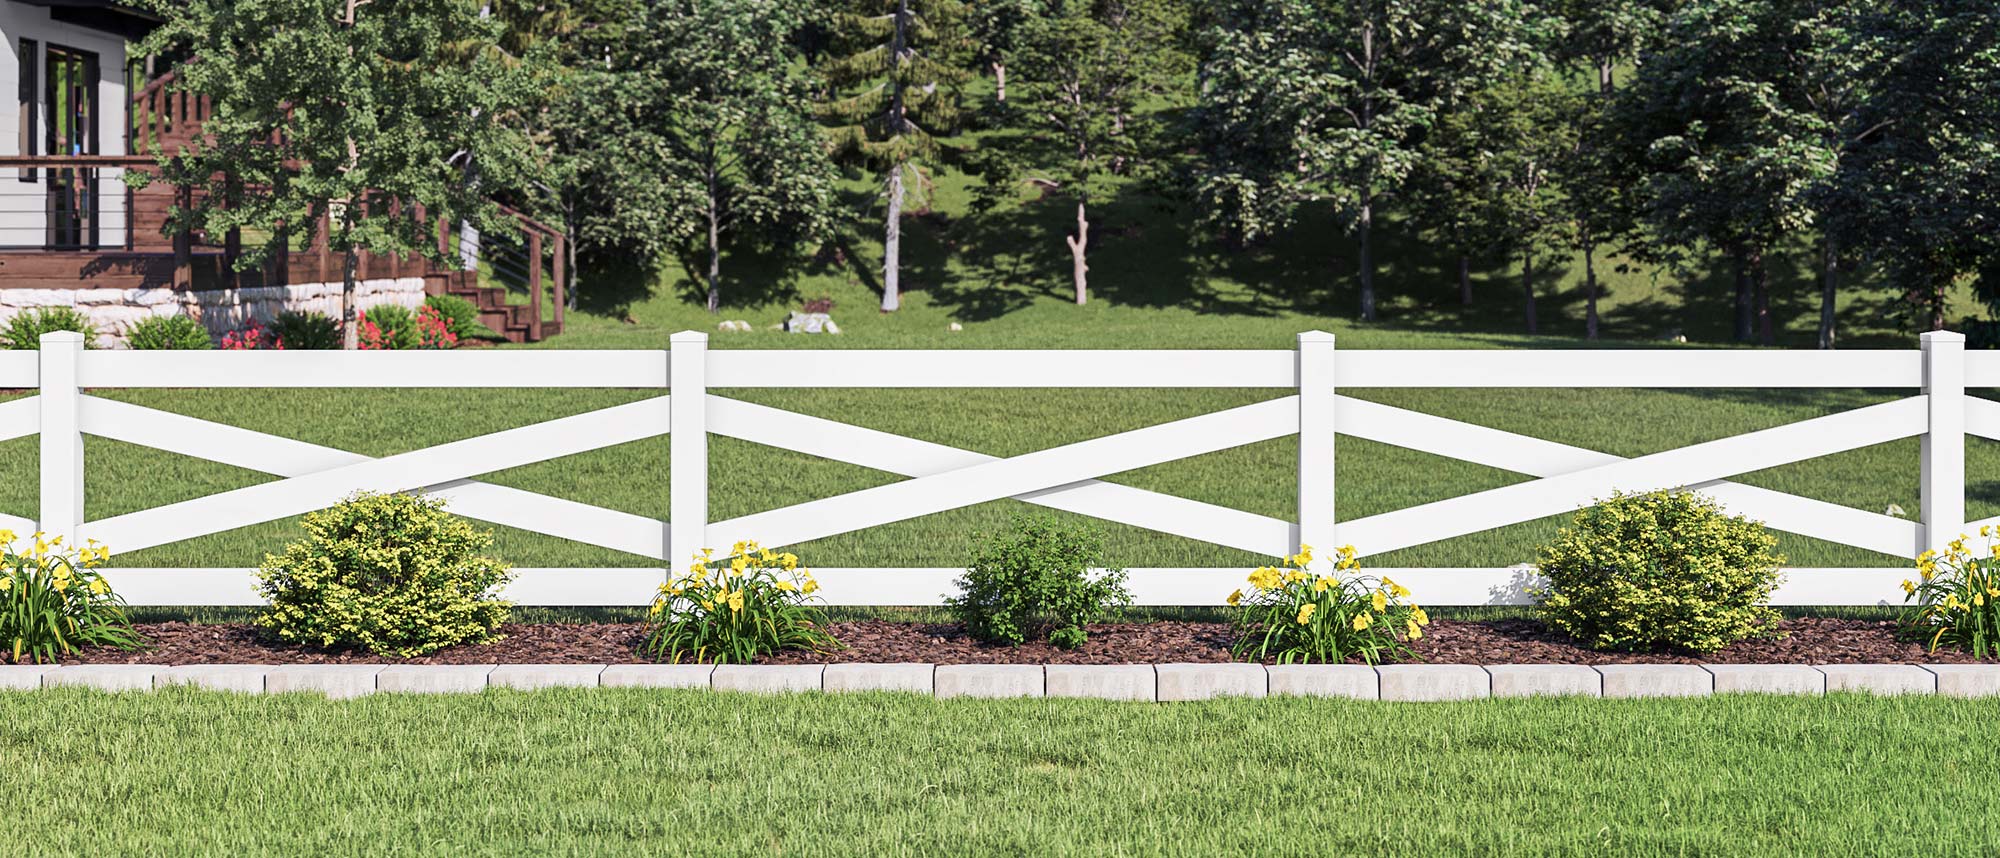 Evansville Indiana Vinyl Security Fence - Ranch Rail Crossbuck Style